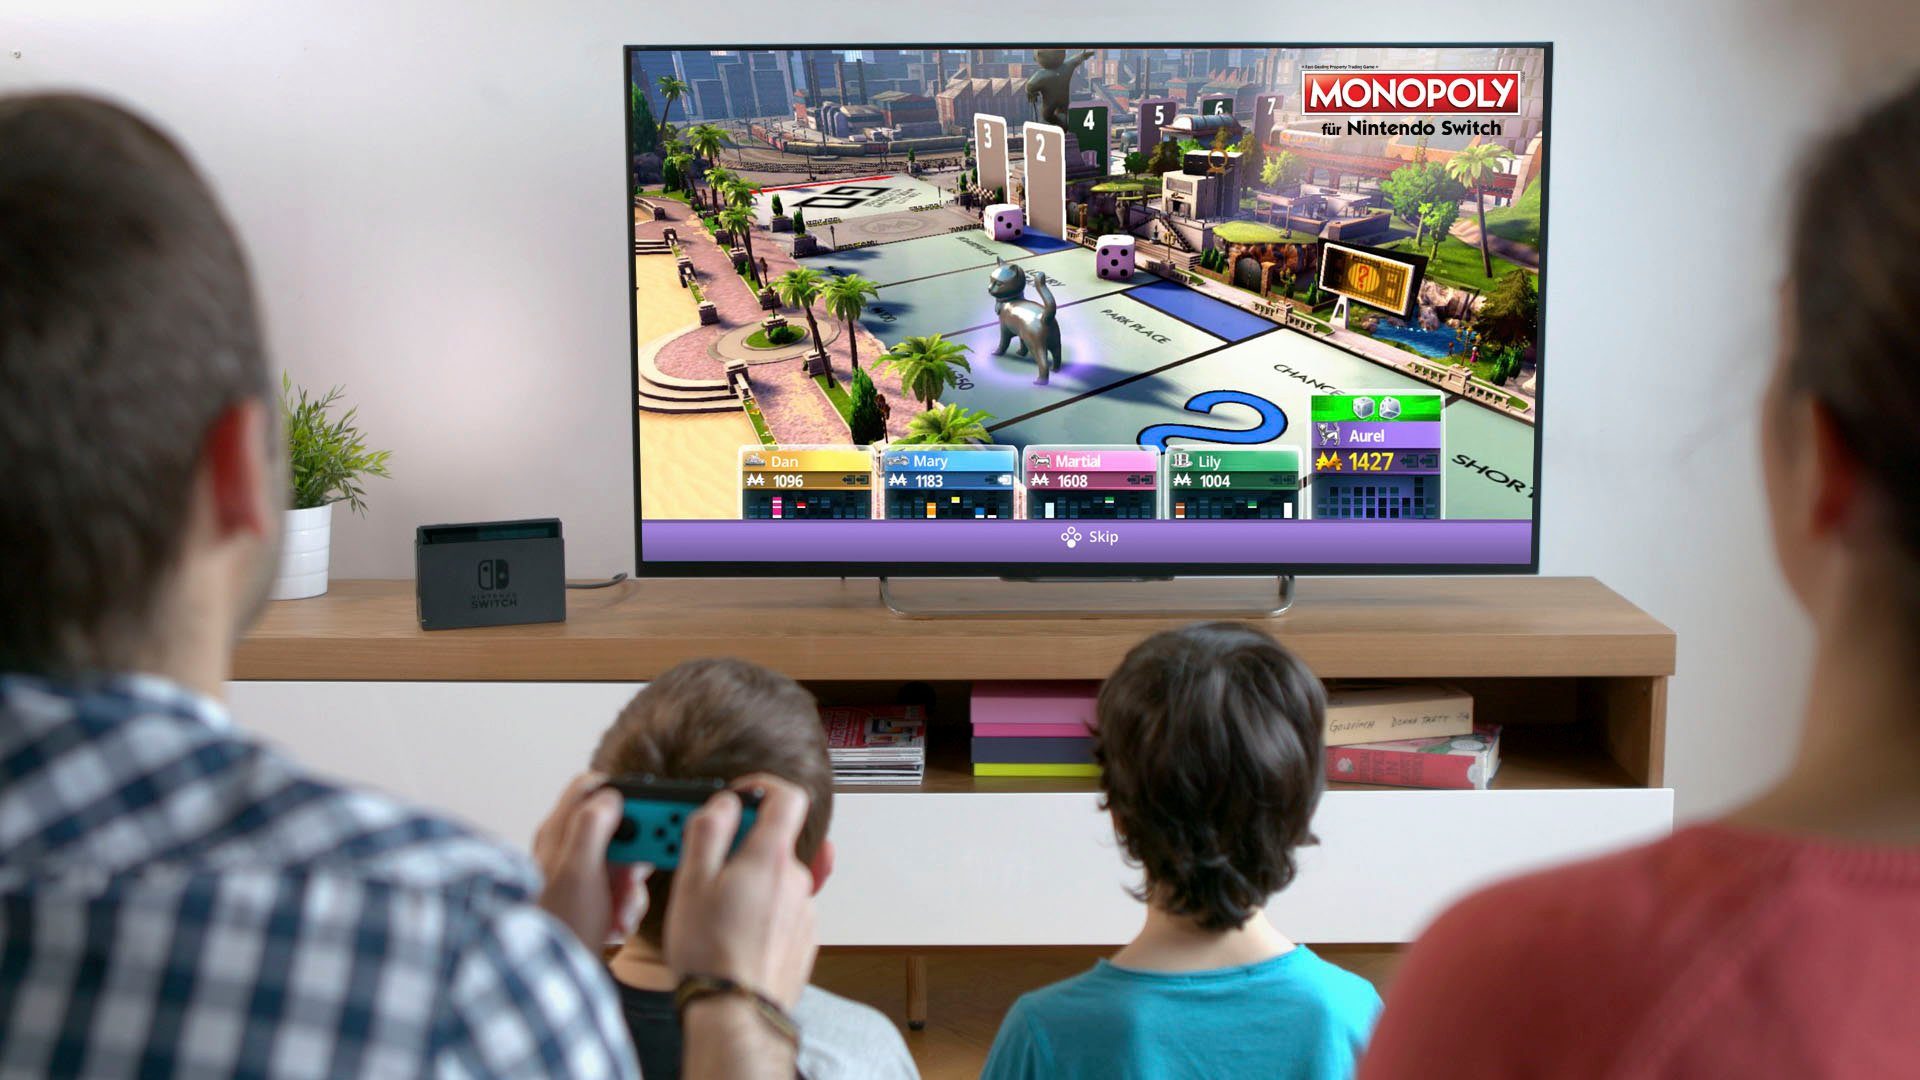 (CODE BOX) IN UBISOFT MONOPOLY THE Switch Nintendo